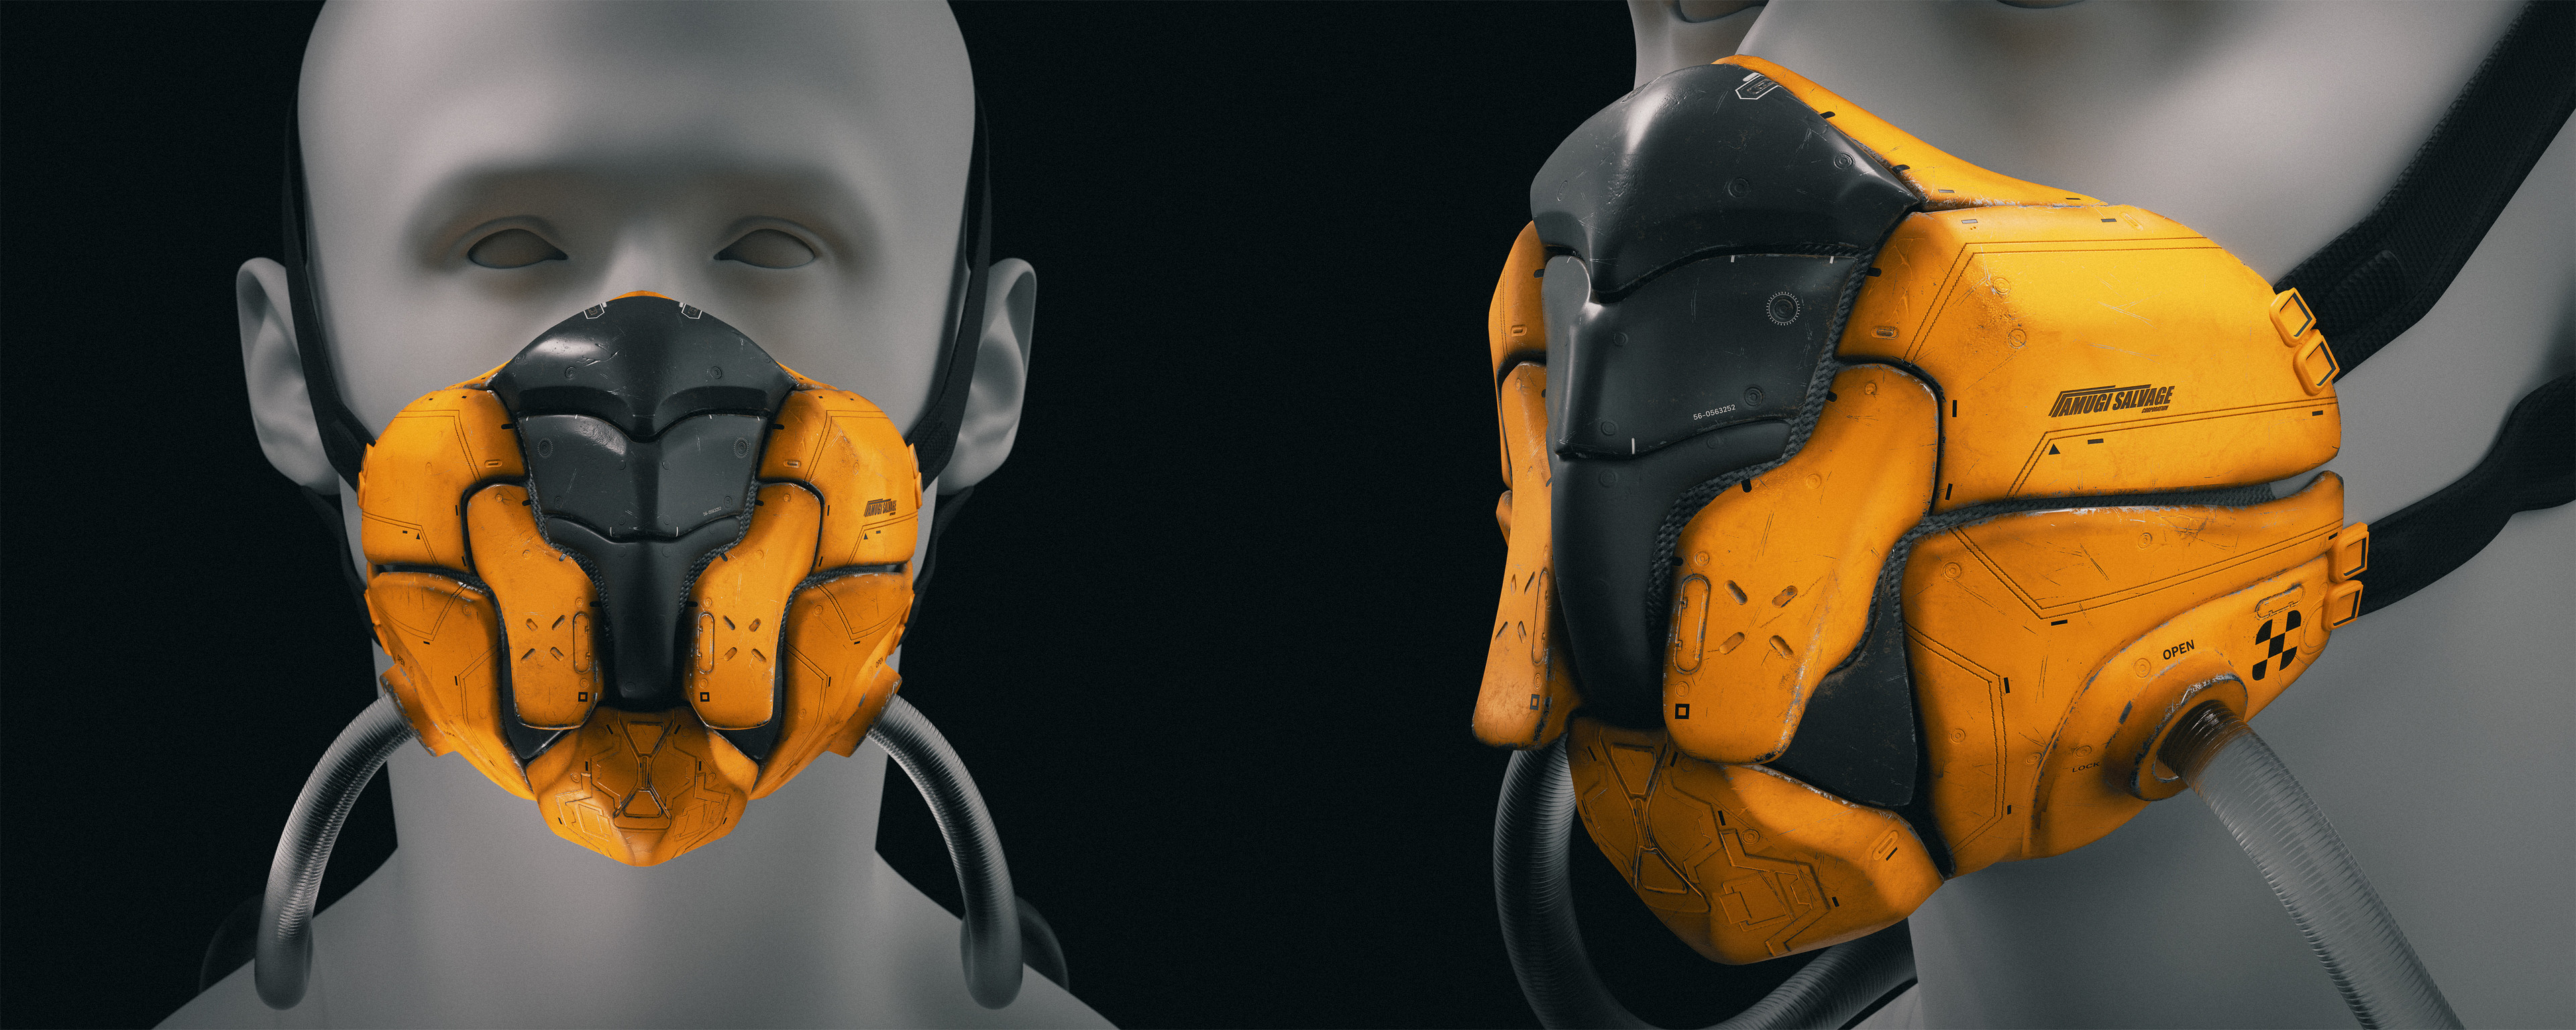 Facemask. I can come up with a reason why the pilot needs it if you force me ;) Really was just practising retopology here.